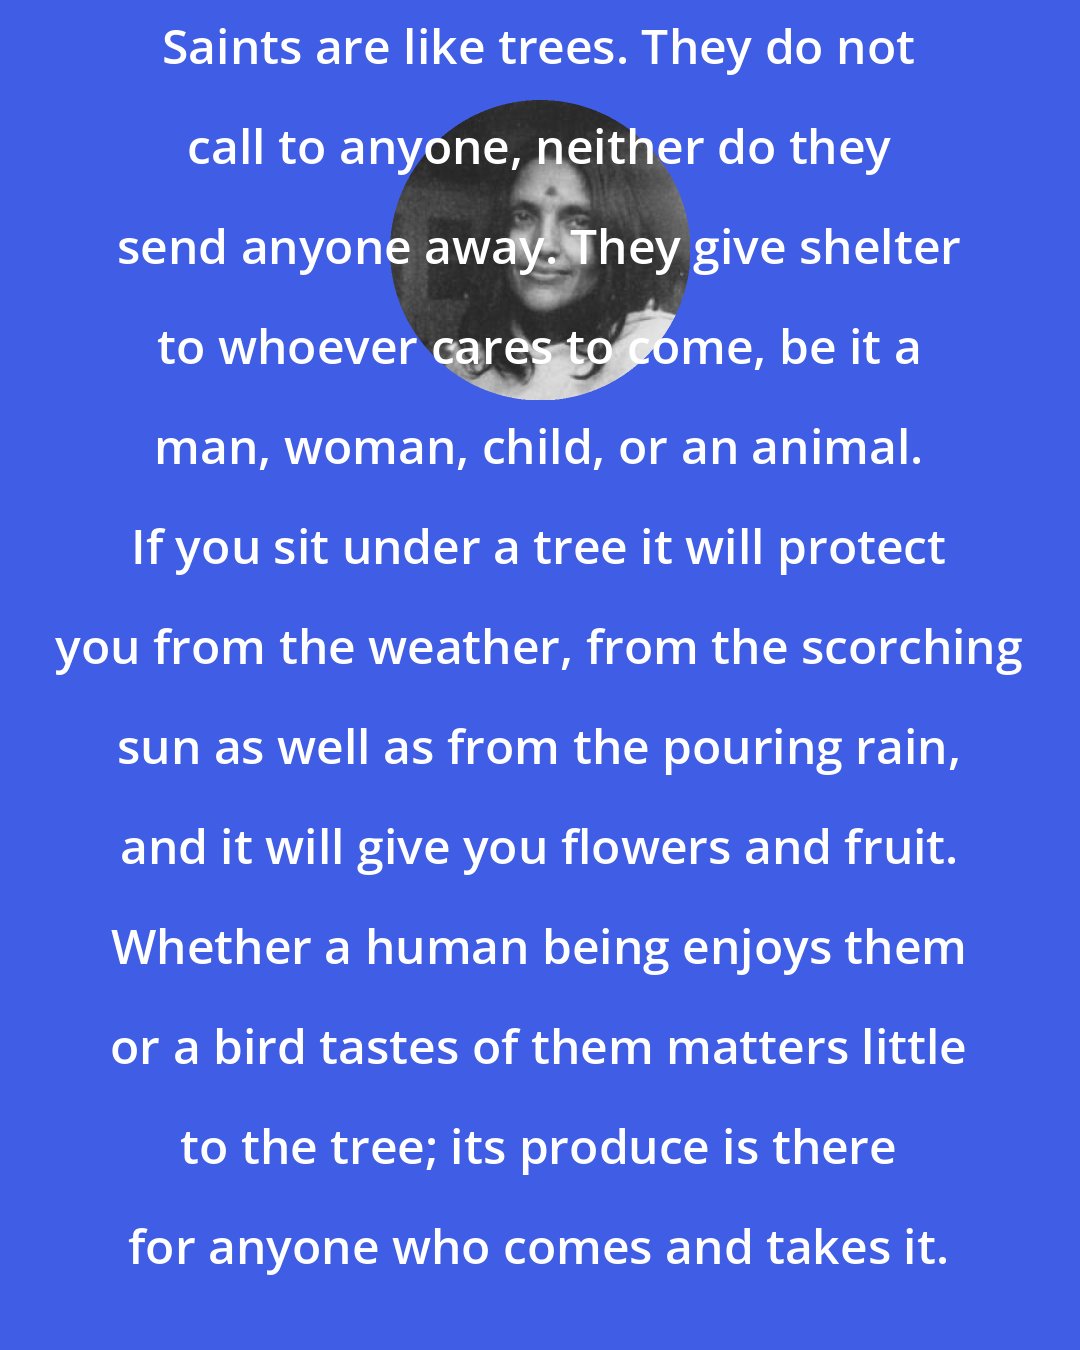 Anandamayi Ma: Saints are like trees. They do not call to anyone, neither do they send anyone away. They give shelter to whoever cares to come, be it a man, woman, child, or an animal. If you sit under a tree it will protect you from the weather, from the scorching sun as well as from the pouring rain, and it will give you flowers and fruit. Whether a human being enjoys them or a bird tastes of them matters little to the tree; its produce is there for anyone who comes and takes it.